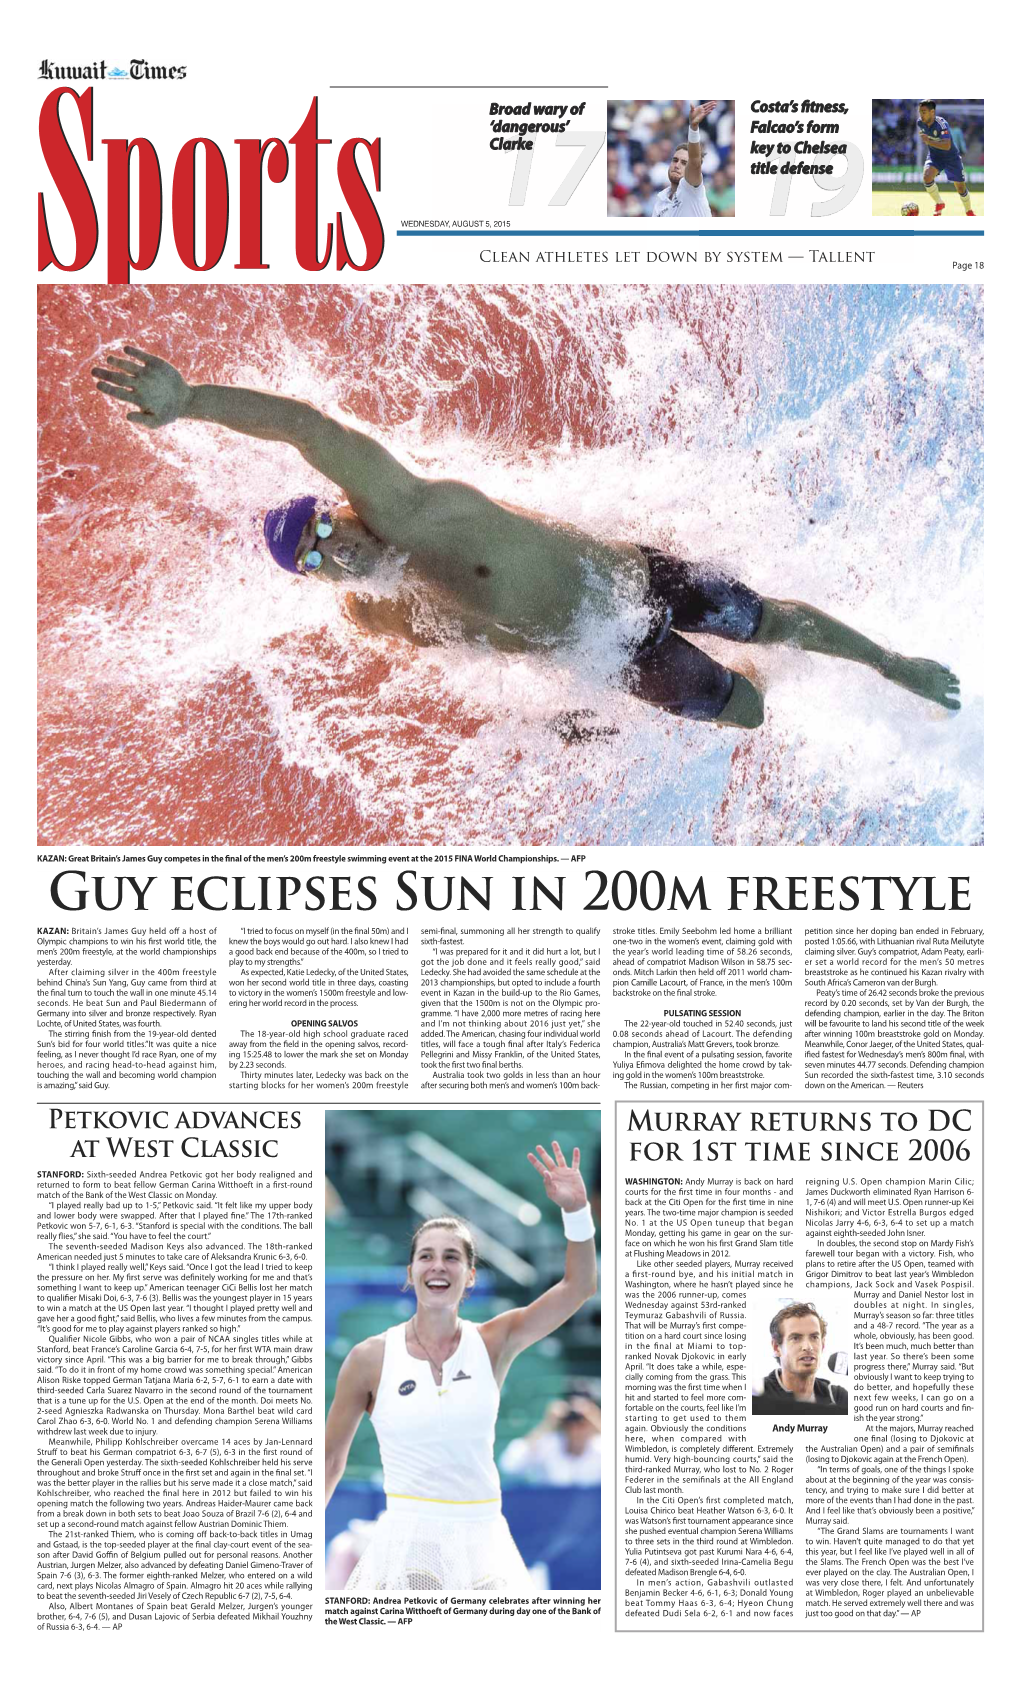 Guy Eclipses Sun in 200M Freestyle